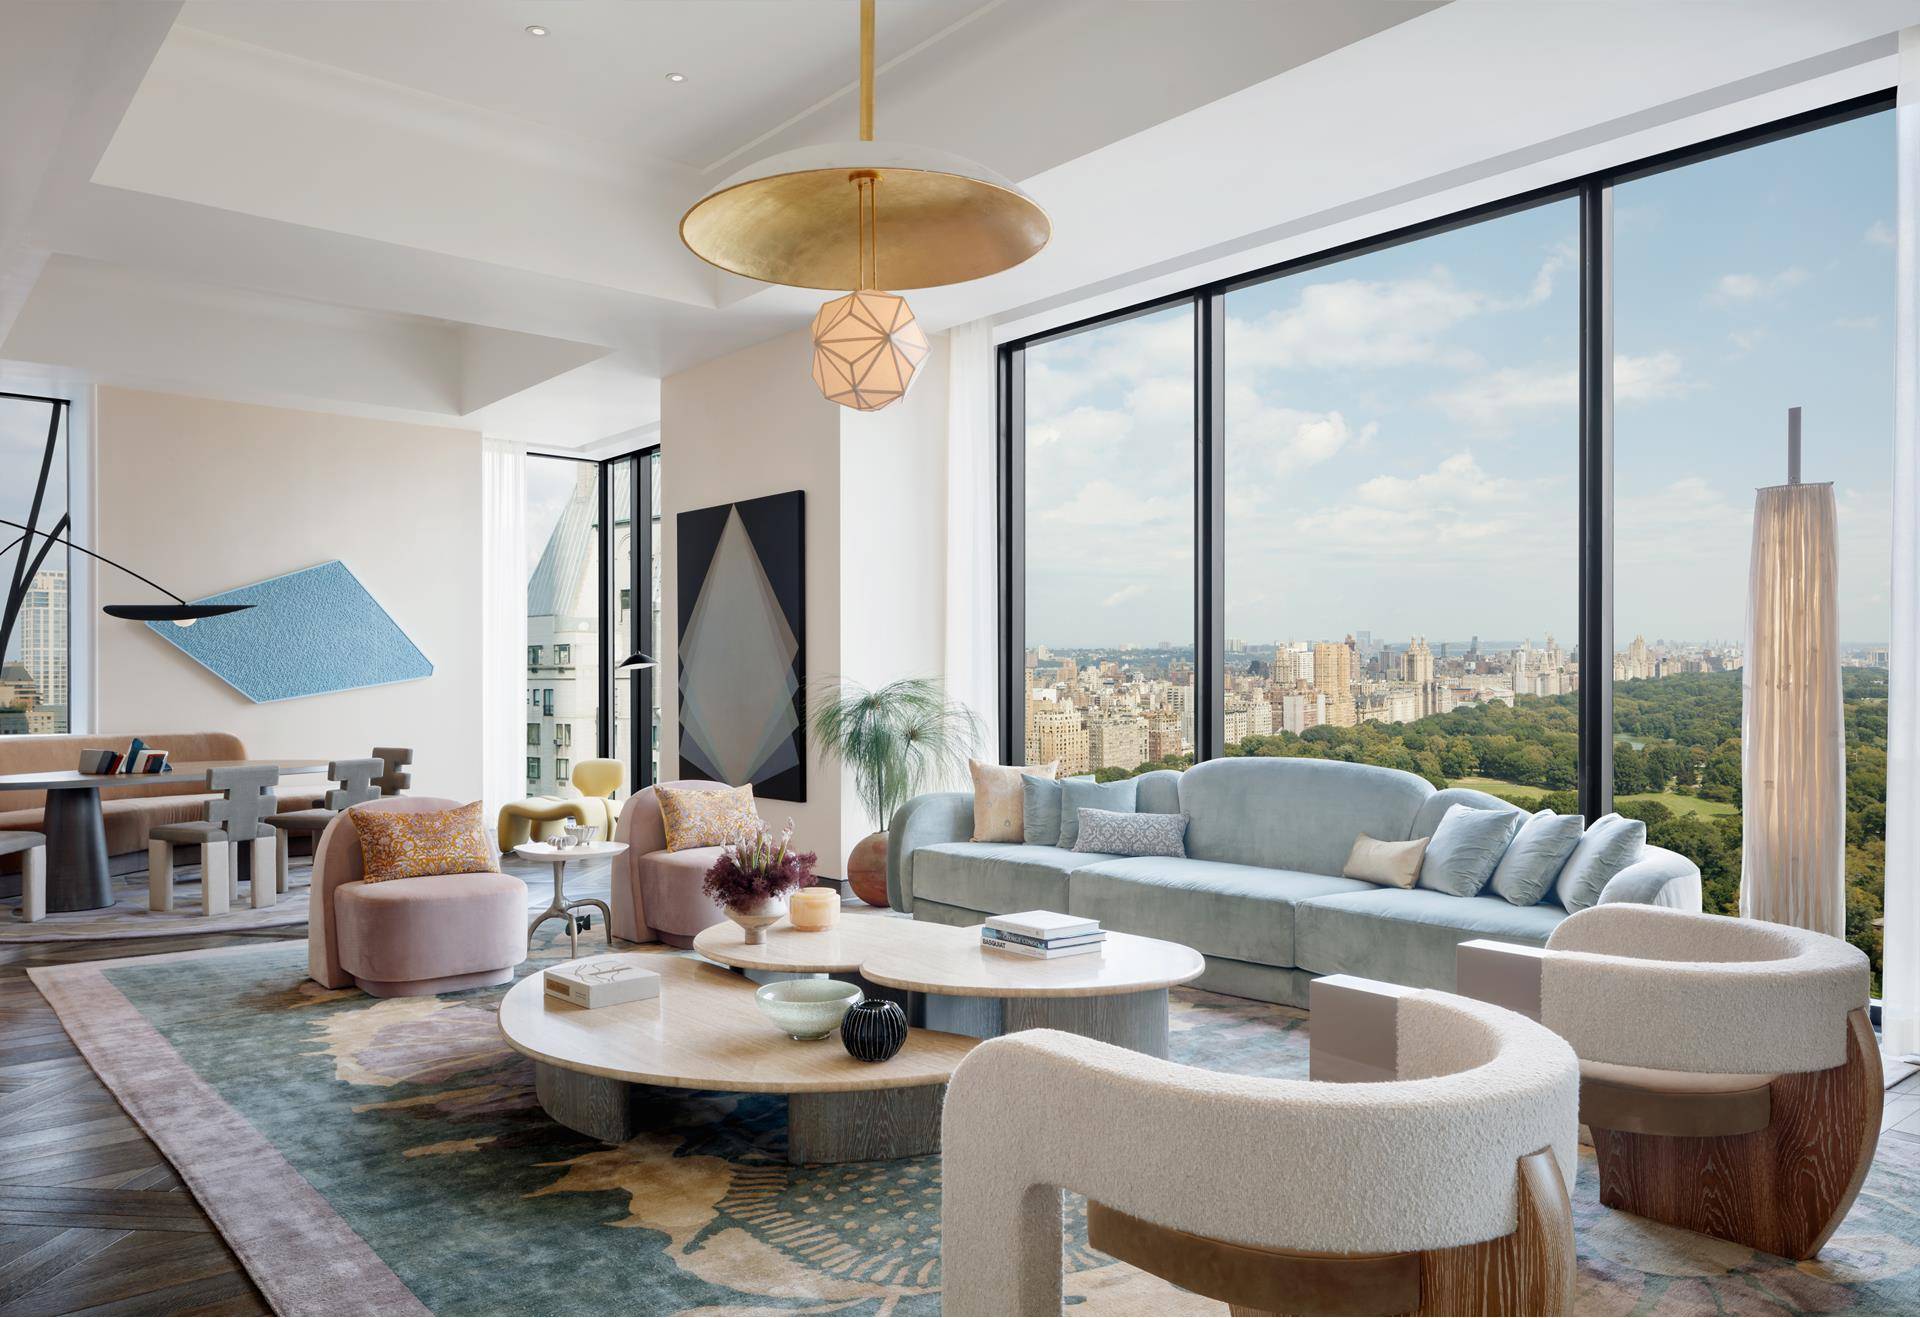 This gracefully proportioned, full floor 4, 492 square foot Tower Residence with three bedrooms and three and a half bathrooms is designed for elegant living on a grand scale.